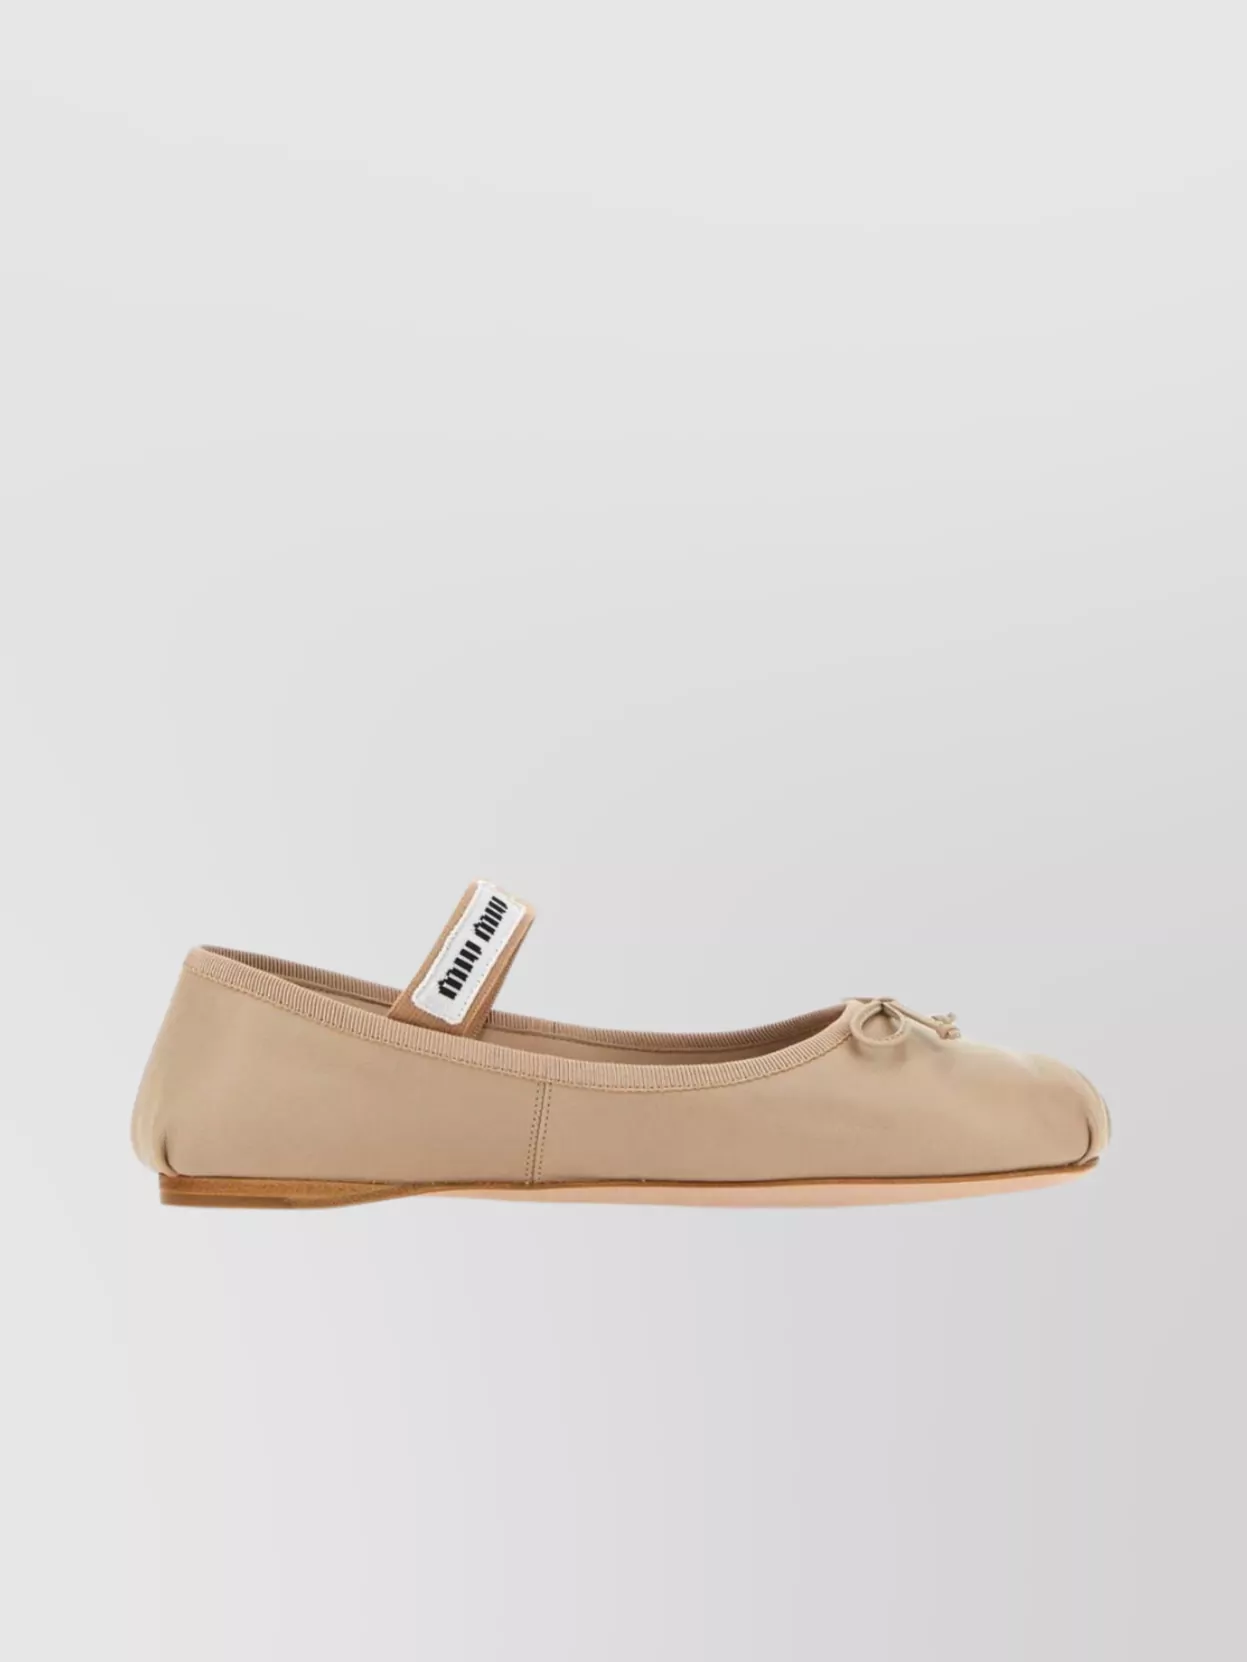 Shop Miu Miu Leather Ballerinas With Round Toe And Bow Detail